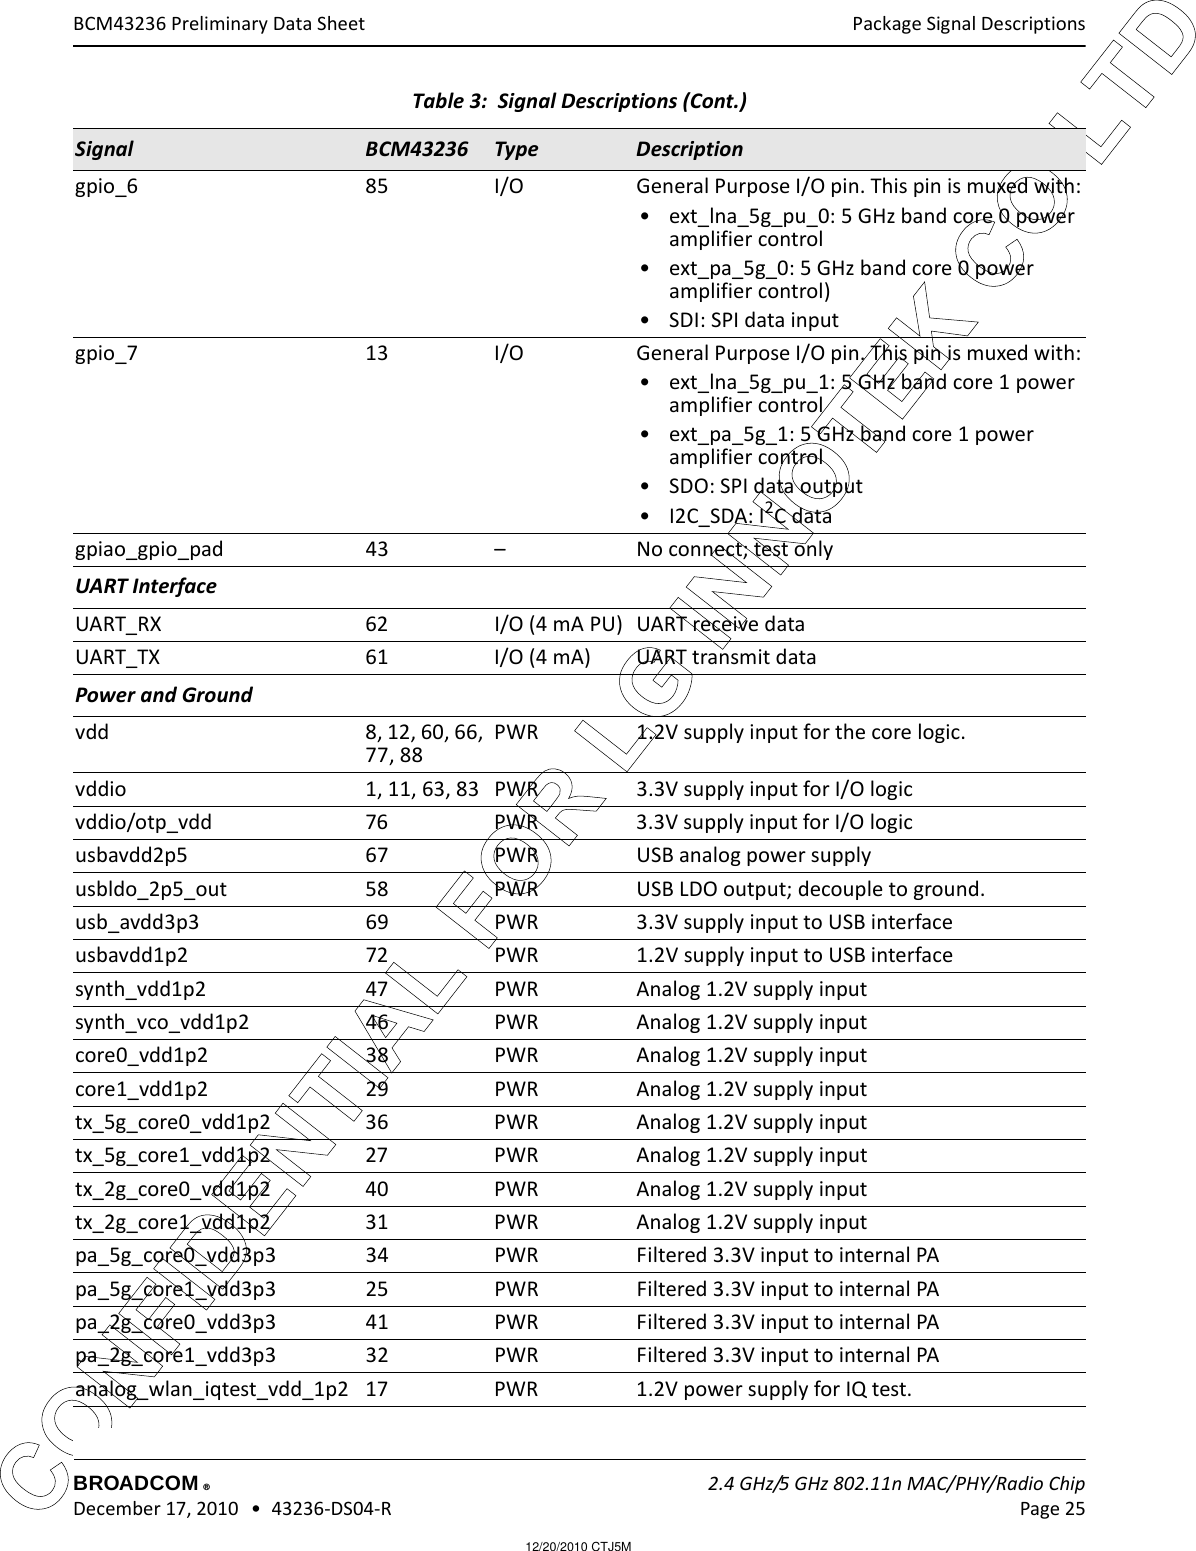 12/20/2010 CTJ5MCONFIDENTIAL FOR LG INNOTEK CO LTD Package Signal DescriptionsBROADCOM    2.4 GHz/5 GHz 802.11n MAC/PHY/Radio Chip December 17, 2010   •  43236-DS04-R Page 25®BCM43236 Preliminary Data Sheetgpio_6 85 I/O General Purpose I/O pin. This pin is muxed with:• ext_lna_5g_pu_0: 5 GHz band core 0 power amplifier control• ext_pa_5g_0: 5 GHz band core 0 power amplifier control)• SDI: SPI data inputgpio_7 13 I/O General Purpose I/O pin. This pin is muxed with:• ext_lna_5g_pu_1: 5 GHz band core 1 power amplifier control• ext_pa_5g_1: 5 GHz band core 1 power amplifier control• SDO: SPI data output•I2C_SDA: I2C datagpiao_gpio_pad 43 – No connect; test onlyUART InterfaceUART_RX 62 I/O (4 mA PU) UART receive dataUART_TX 61 I/O (4 mA) UART transmit dataPower and Groundvdd 8, 12, 60, 66, 77, 88PWR 1.2V supply input for the core logic.vddio 1, 11, 63, 83 PWR 3.3V supply input for I/O logic vddio/otp_vdd 76 PWR 3.3V supply input for I/O logic usbavdd2p5 67 PWR USB analog power supplyusbldo_2p5_out 58 PWR USB LDO output; decouple to ground.usb_avdd3p3 69 PWR 3.3V supply input to USB interfaceusbavdd1p2 72 PWR 1.2V supply input to USB interfacesynth_vdd1p2 47 PWR Analog 1.2V supply inputsynth_vco_vdd1p2 46 PWR Analog 1.2V supply inputcore0_vdd1p2 38 PWR Analog 1.2V supply inputcore1_vdd1p2 29 PWR Analog 1.2V supply inputtx_5g_core0_vdd1p2 36 PWR Analog 1.2V supply inputtx_5g_core1_vdd1p2 27 PWR Analog 1.2V supply inputtx_2g_core0_vdd1p2 40 PWR Analog 1.2V supply inputtx_2g_core1_vdd1p2 31 PWR Analog 1.2V supply inputpa_5g_core0_vdd3p3 34 PWR Filtered 3.3V input to internal PApa_5g_core1_vdd3p3 25 PWR Filtered 3.3V input to internal PApa_2g_core0_vdd3p3 41 PWR Filtered 3.3V input to internal PApa_2g_core1_vdd3p3 32 PWR Filtered 3.3V input to internal PAanalog_wlan_iqtest_vdd_1p2 17 PWR 1.2V power supply for IQ test.Table 3:  Signal Descriptions (Cont.)Signal BCM43236 Type Description